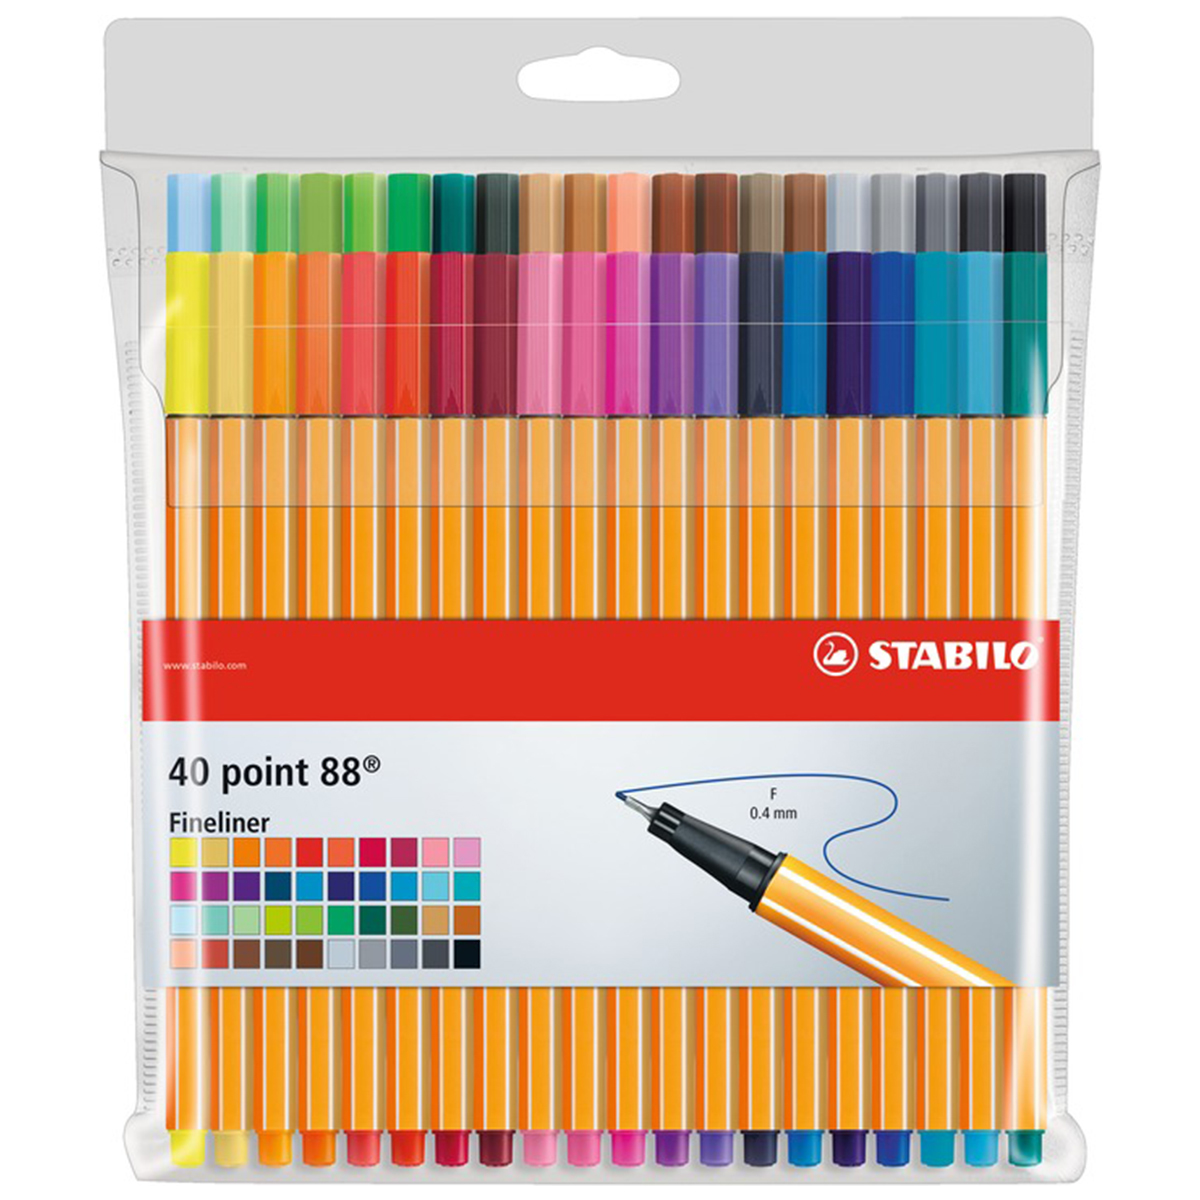 ROTULADOR STABILO POINT 88 (40 PZS.) | Office Depot Mexico